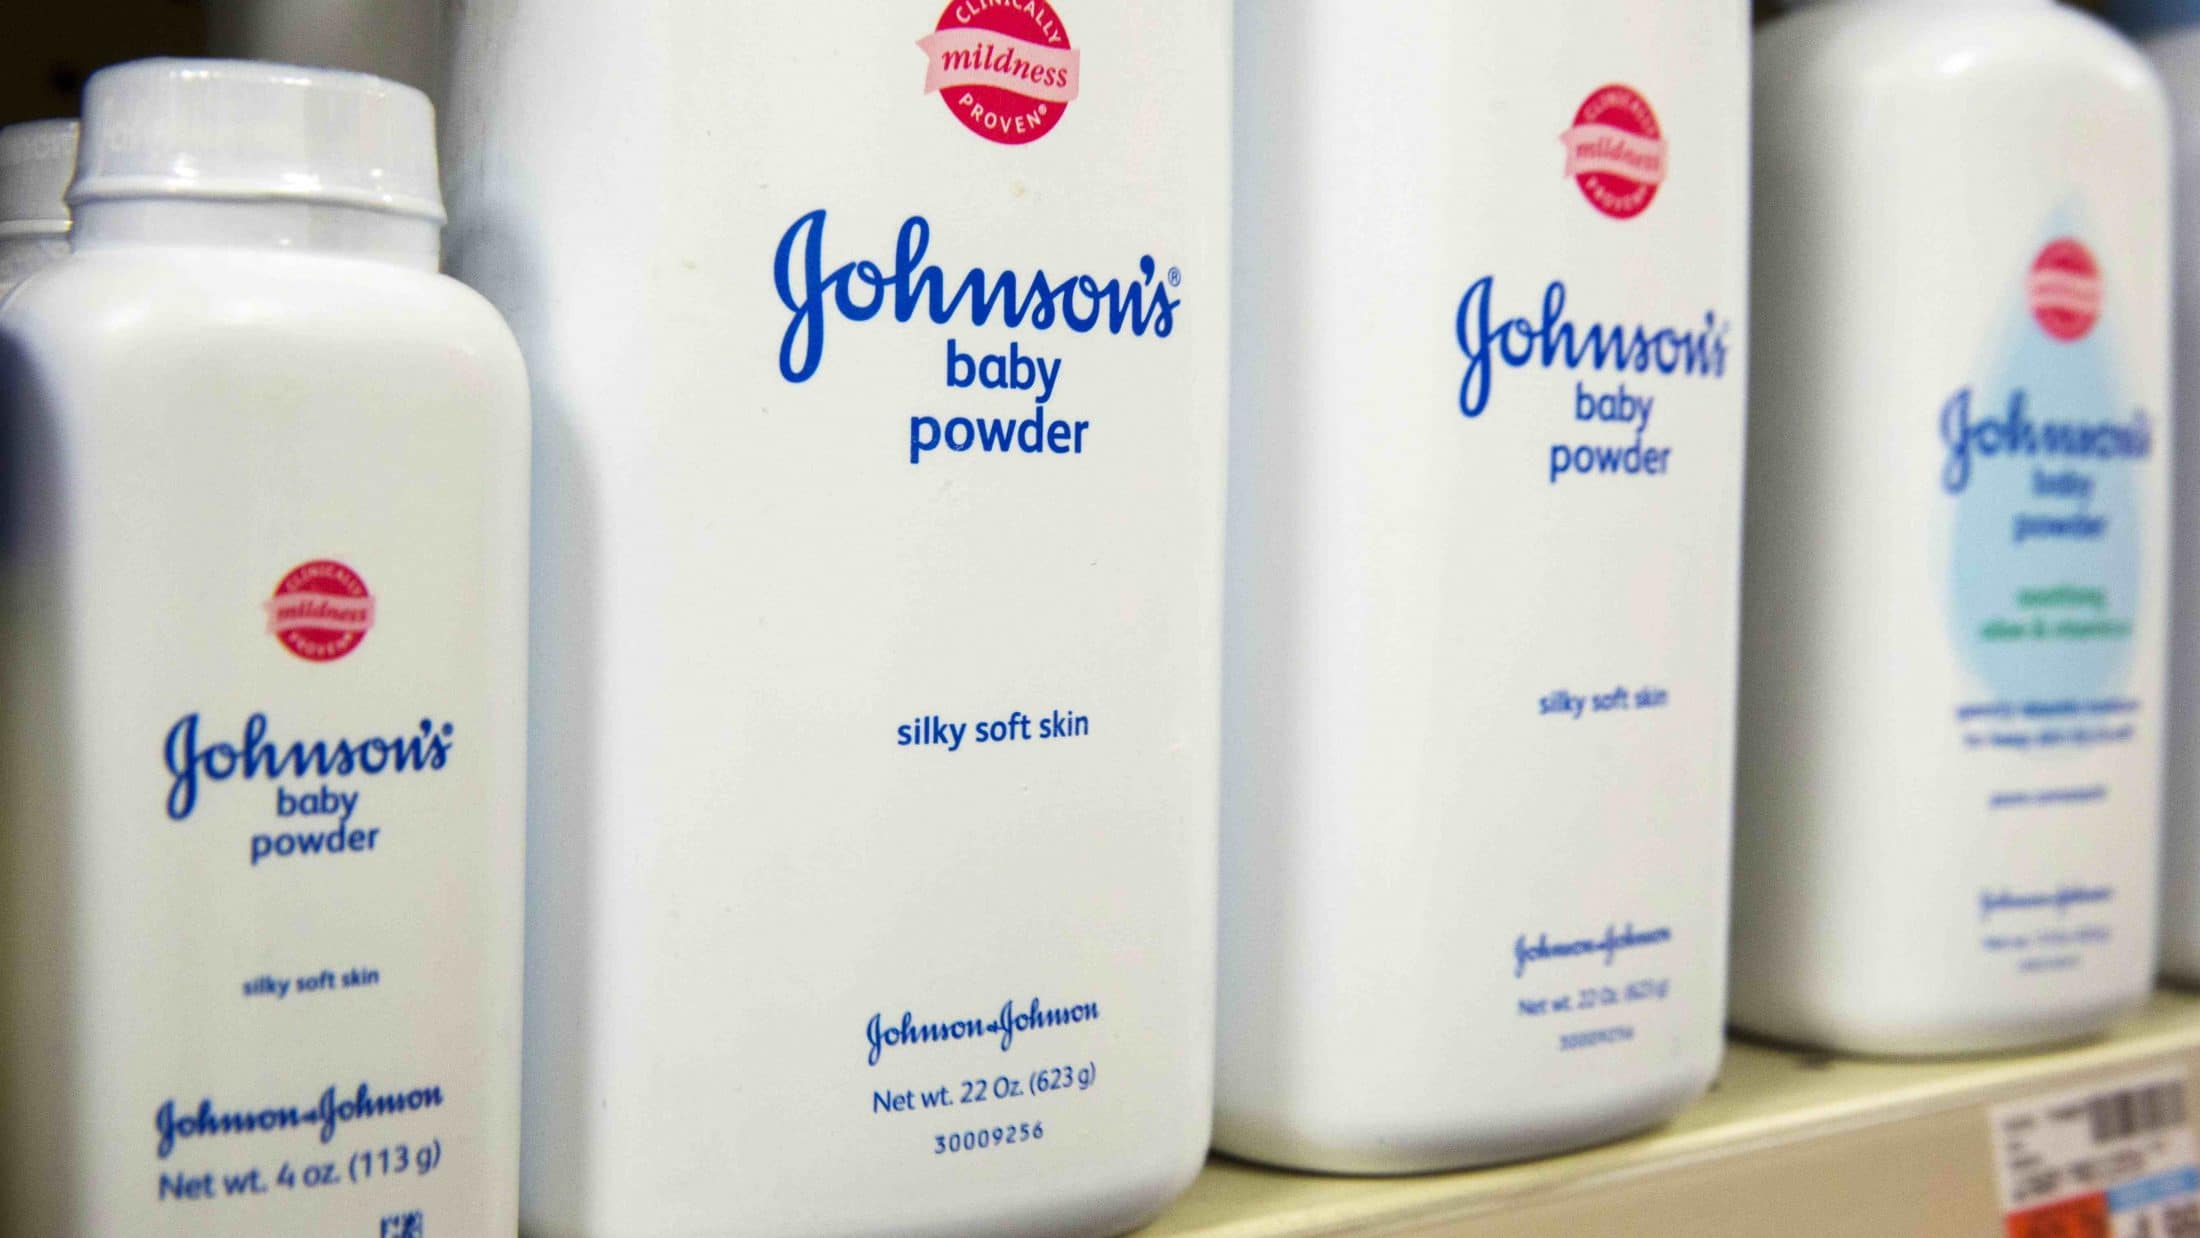 JOHNSON AND JOHNSON’S BABY POWDER HAS BEEN IMPLICATED IN CAUSING OVARIAN CANCER